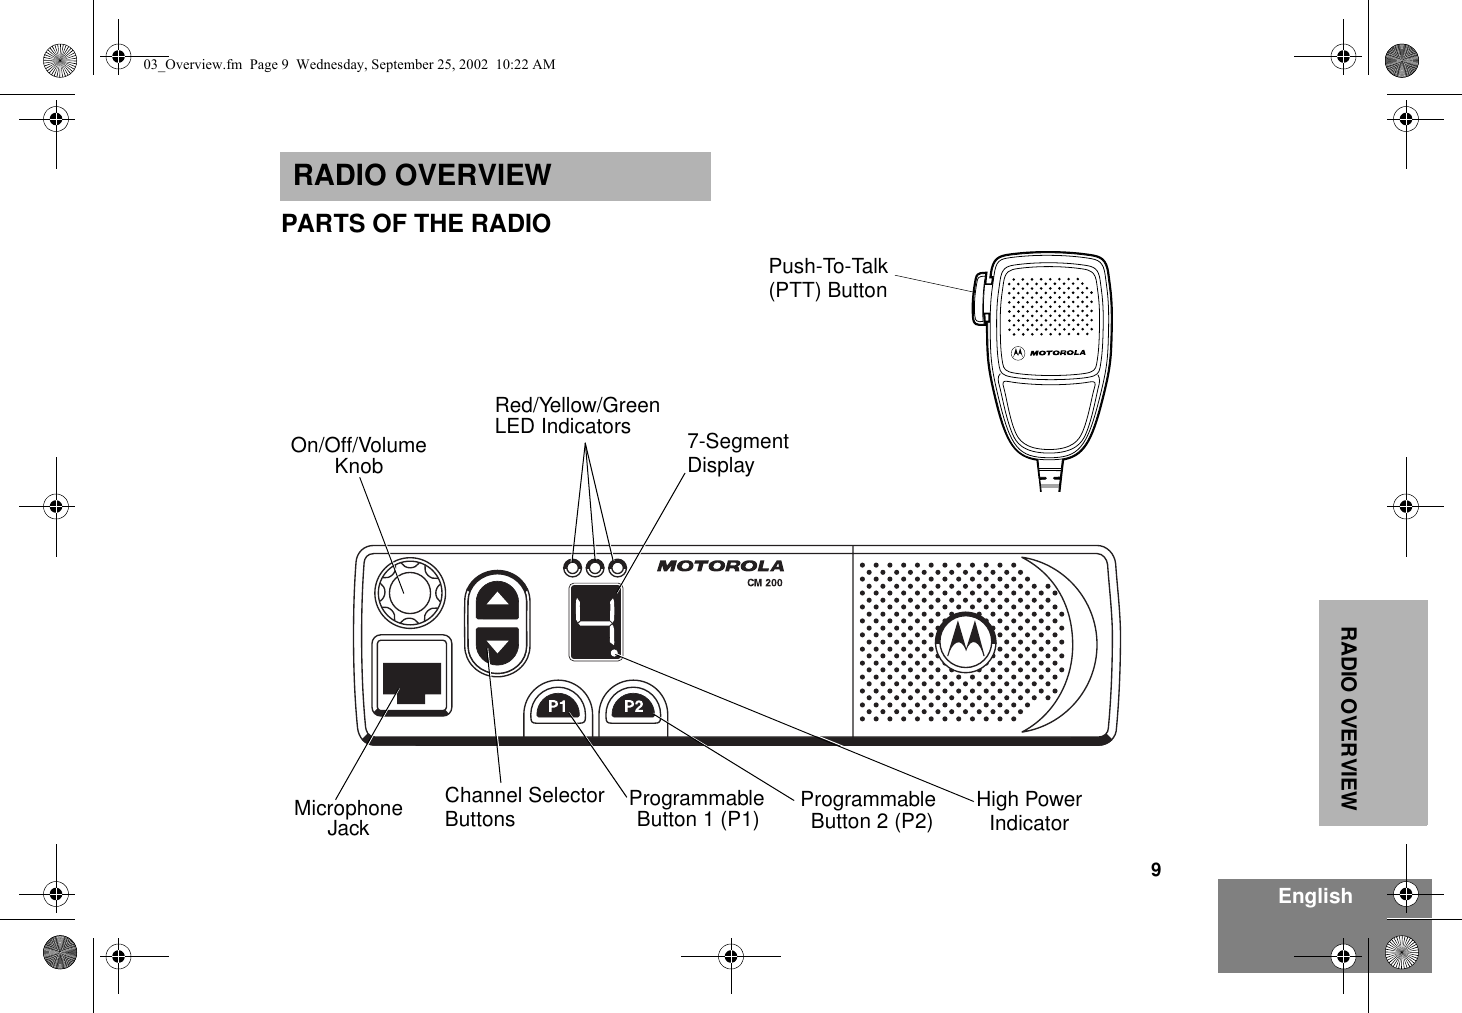 9EnglishRADIO OVERVIEWRADIO OVERVIEWPARTS OF THE RADIORed/Yellow/GreenLED IndicatorsButton 1 (P1)MicrophoneJackKnobOn/Off/VolumeProgrammable7-SegmentDisplayProgrammableButton 2 (P2)Channel SelectorButtonsPush-To-Talk(PTT) ButtonHigh PowerIndicator03_Overview.fm  Page 9  Wednesday, September 25, 2002  10:22 AM